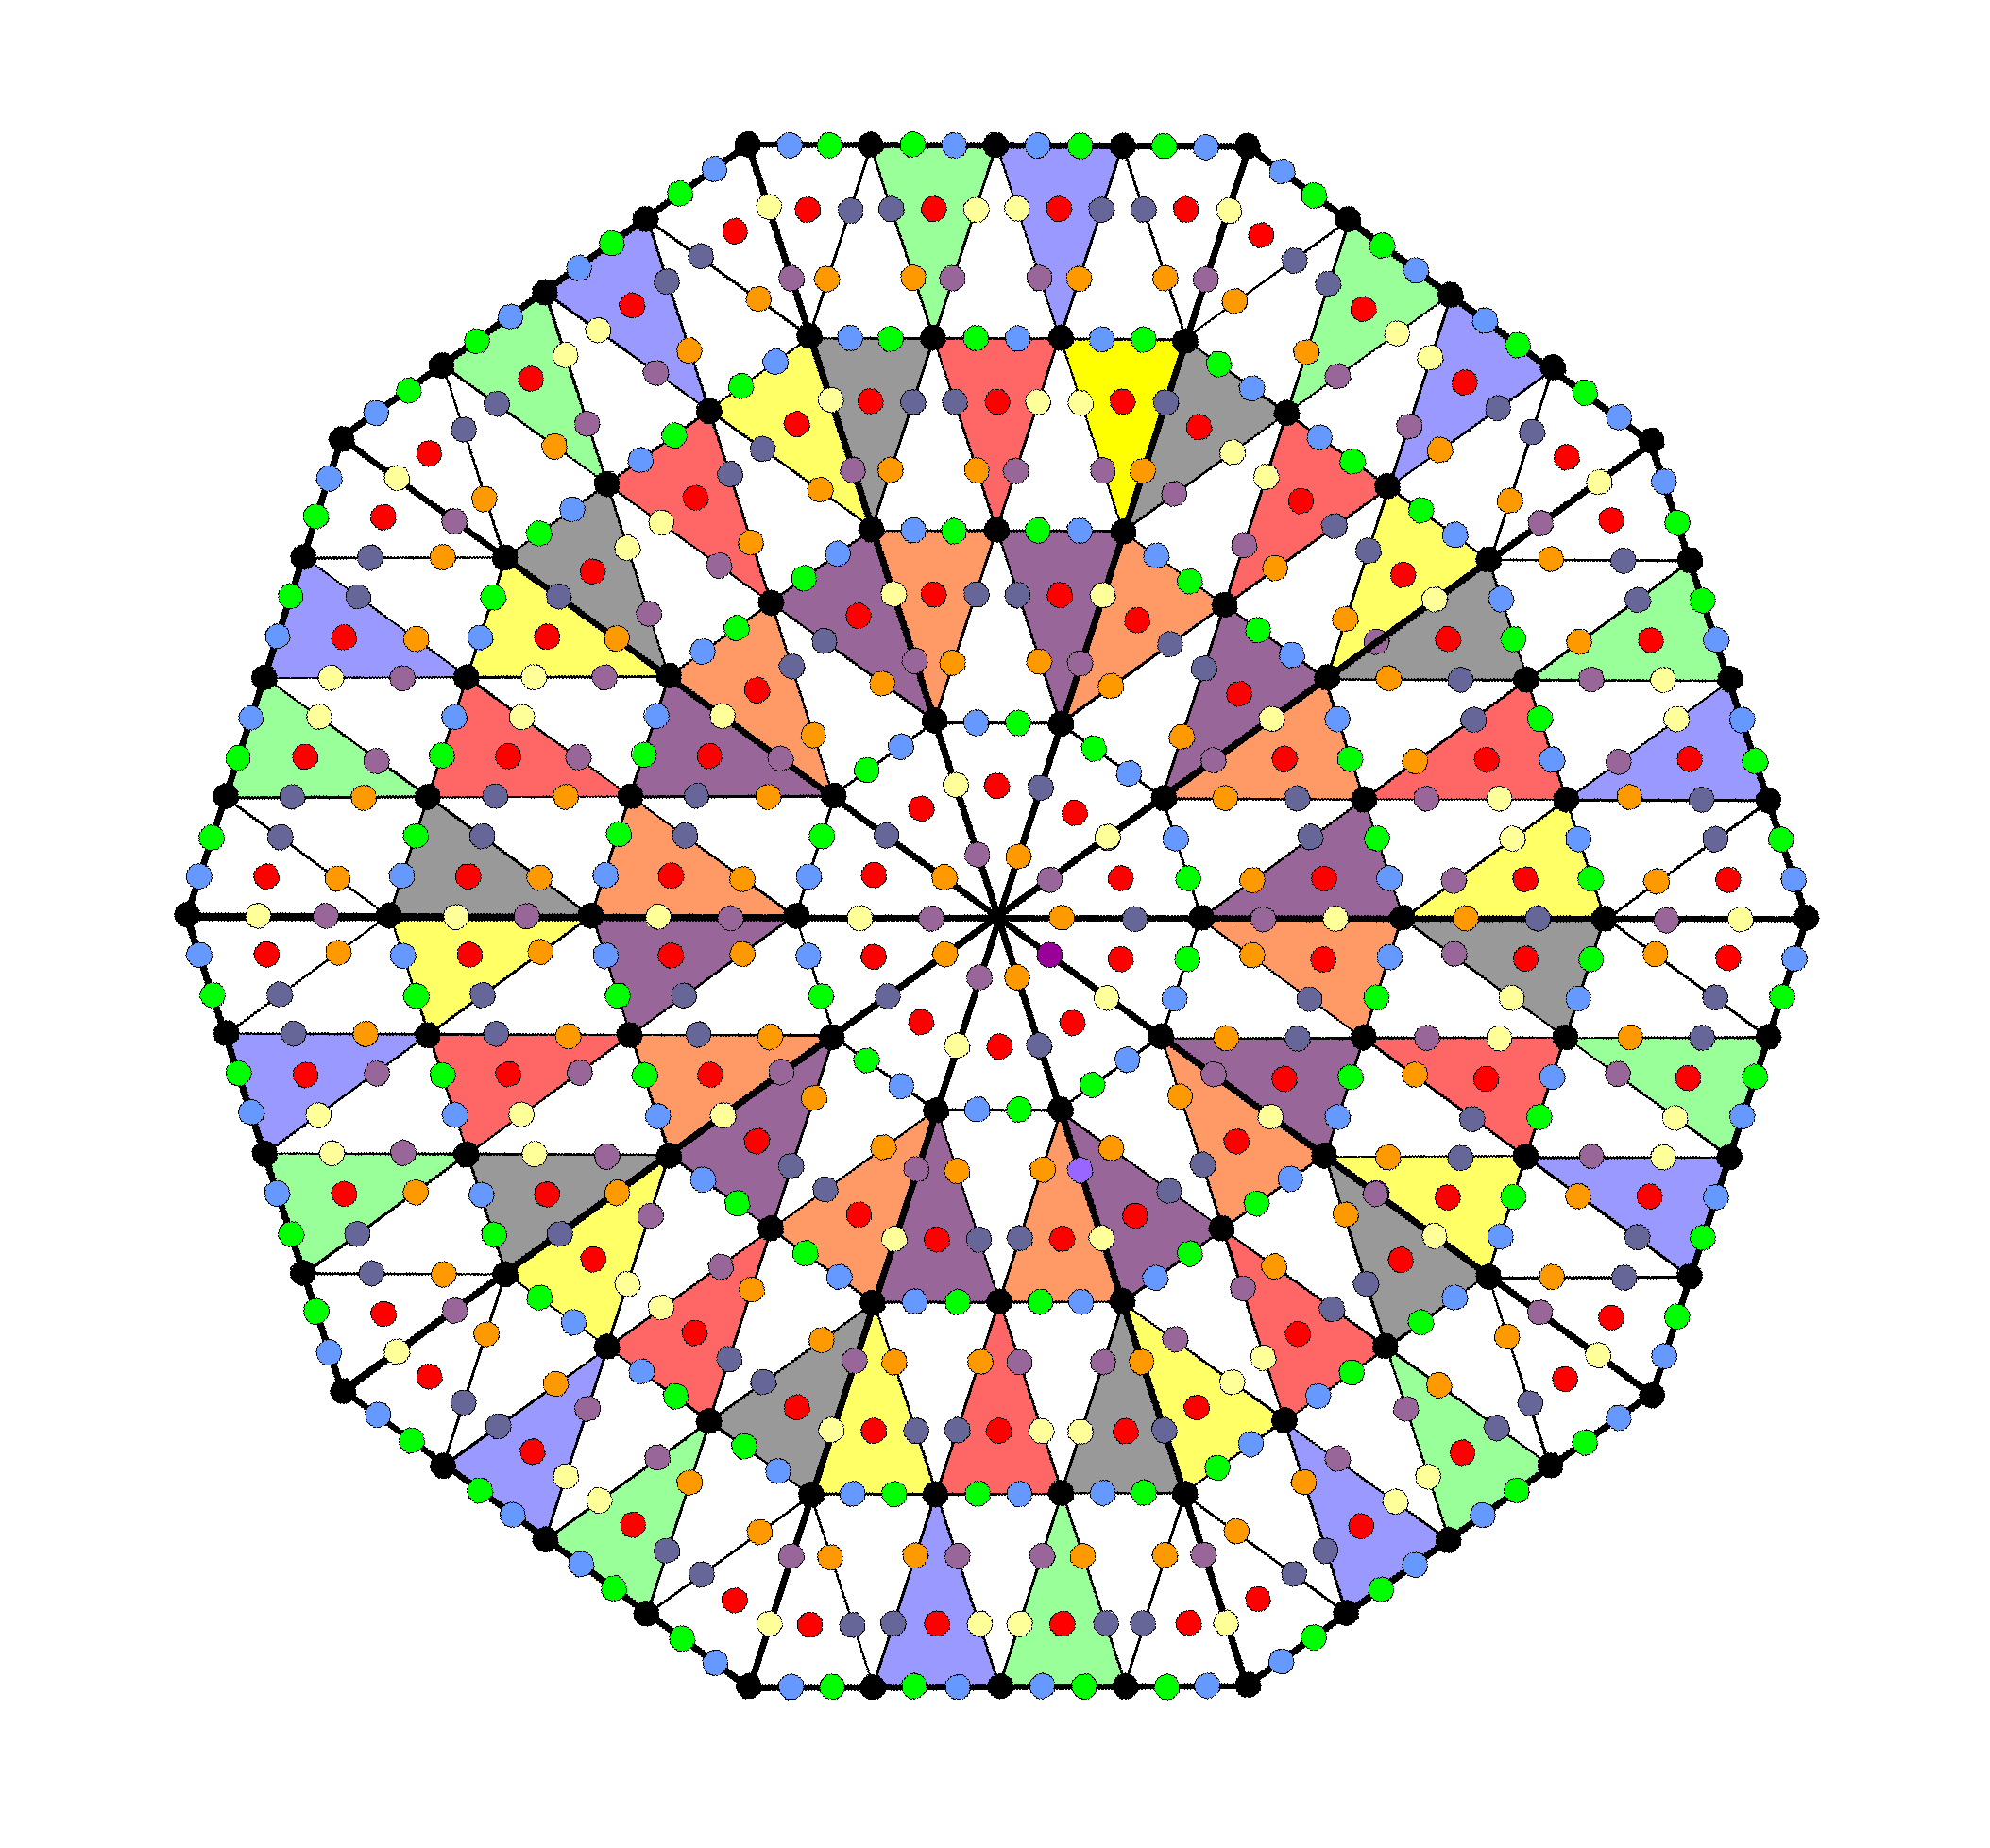 Decagon with 2nd-order tetractyses as sectors has 620 hexagonal yods